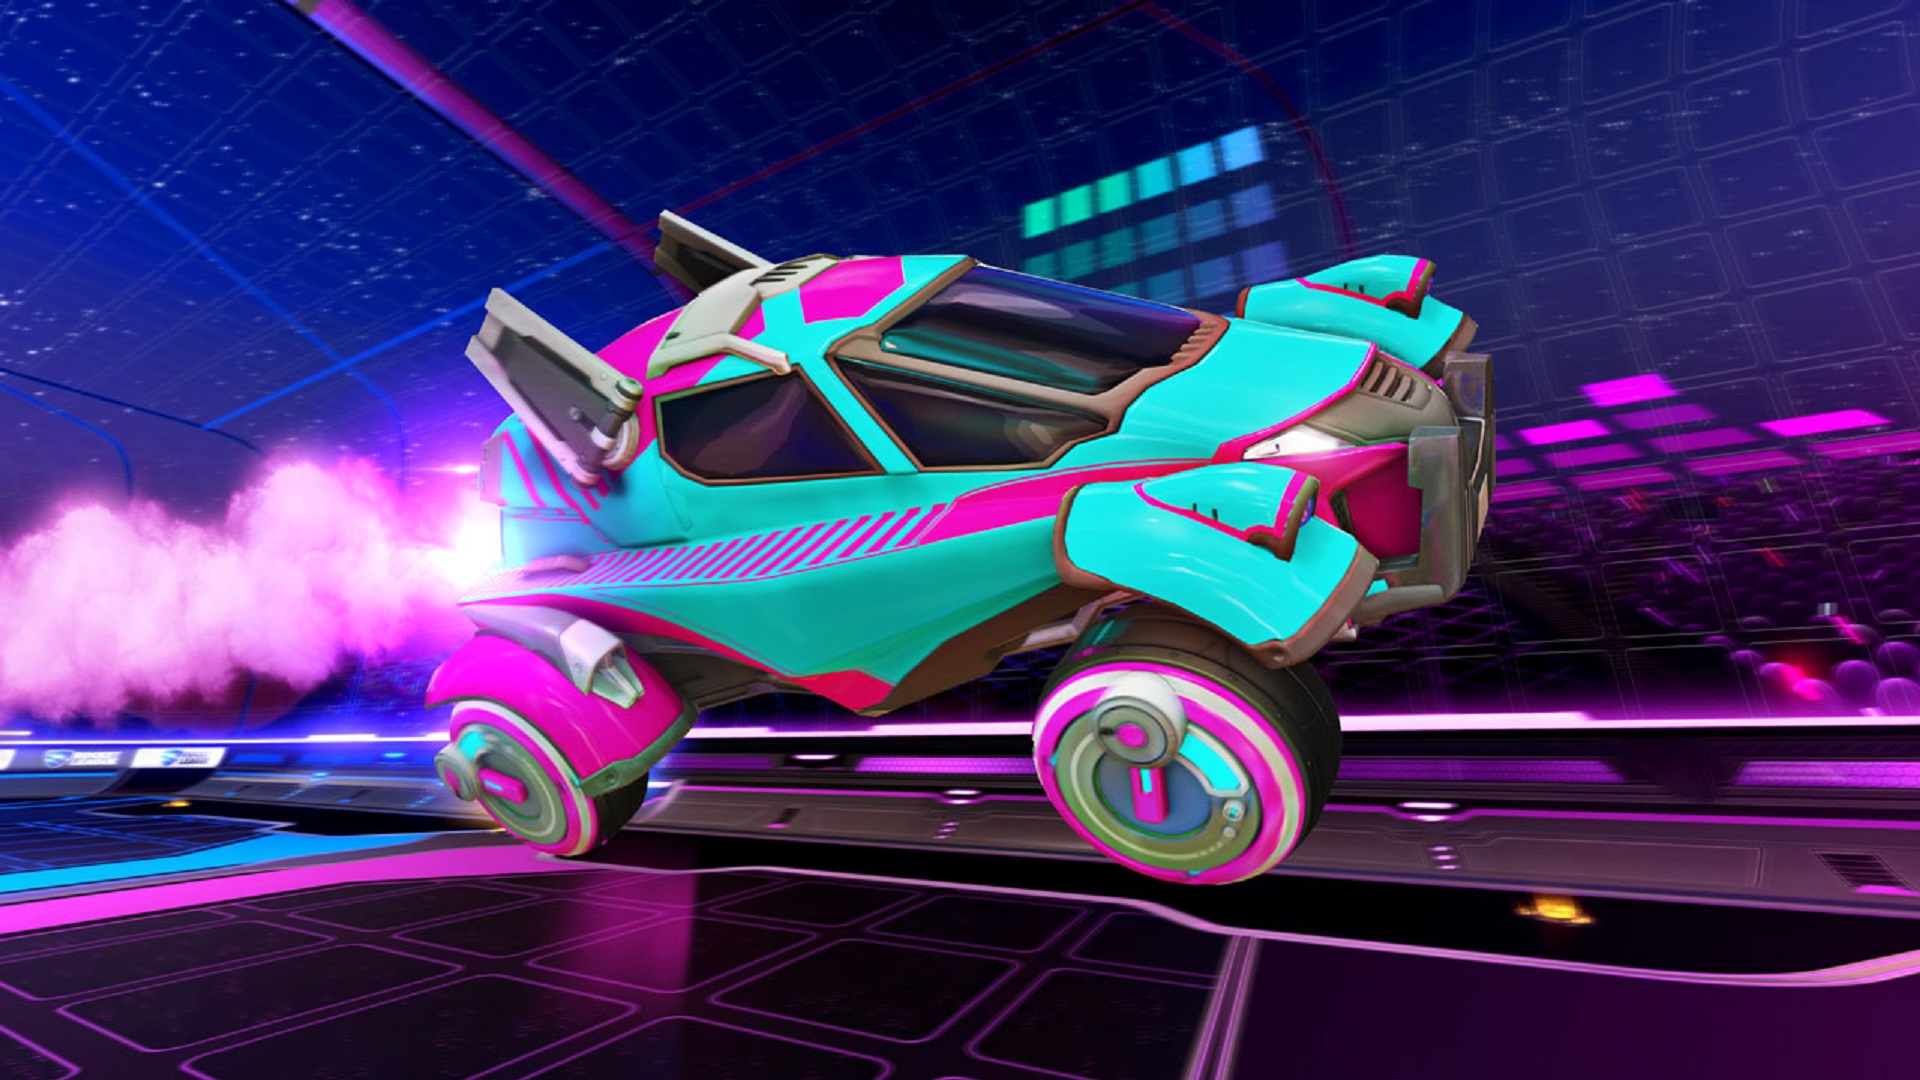 Rocket League codes - a pale blue and pink monster truck flying through the air